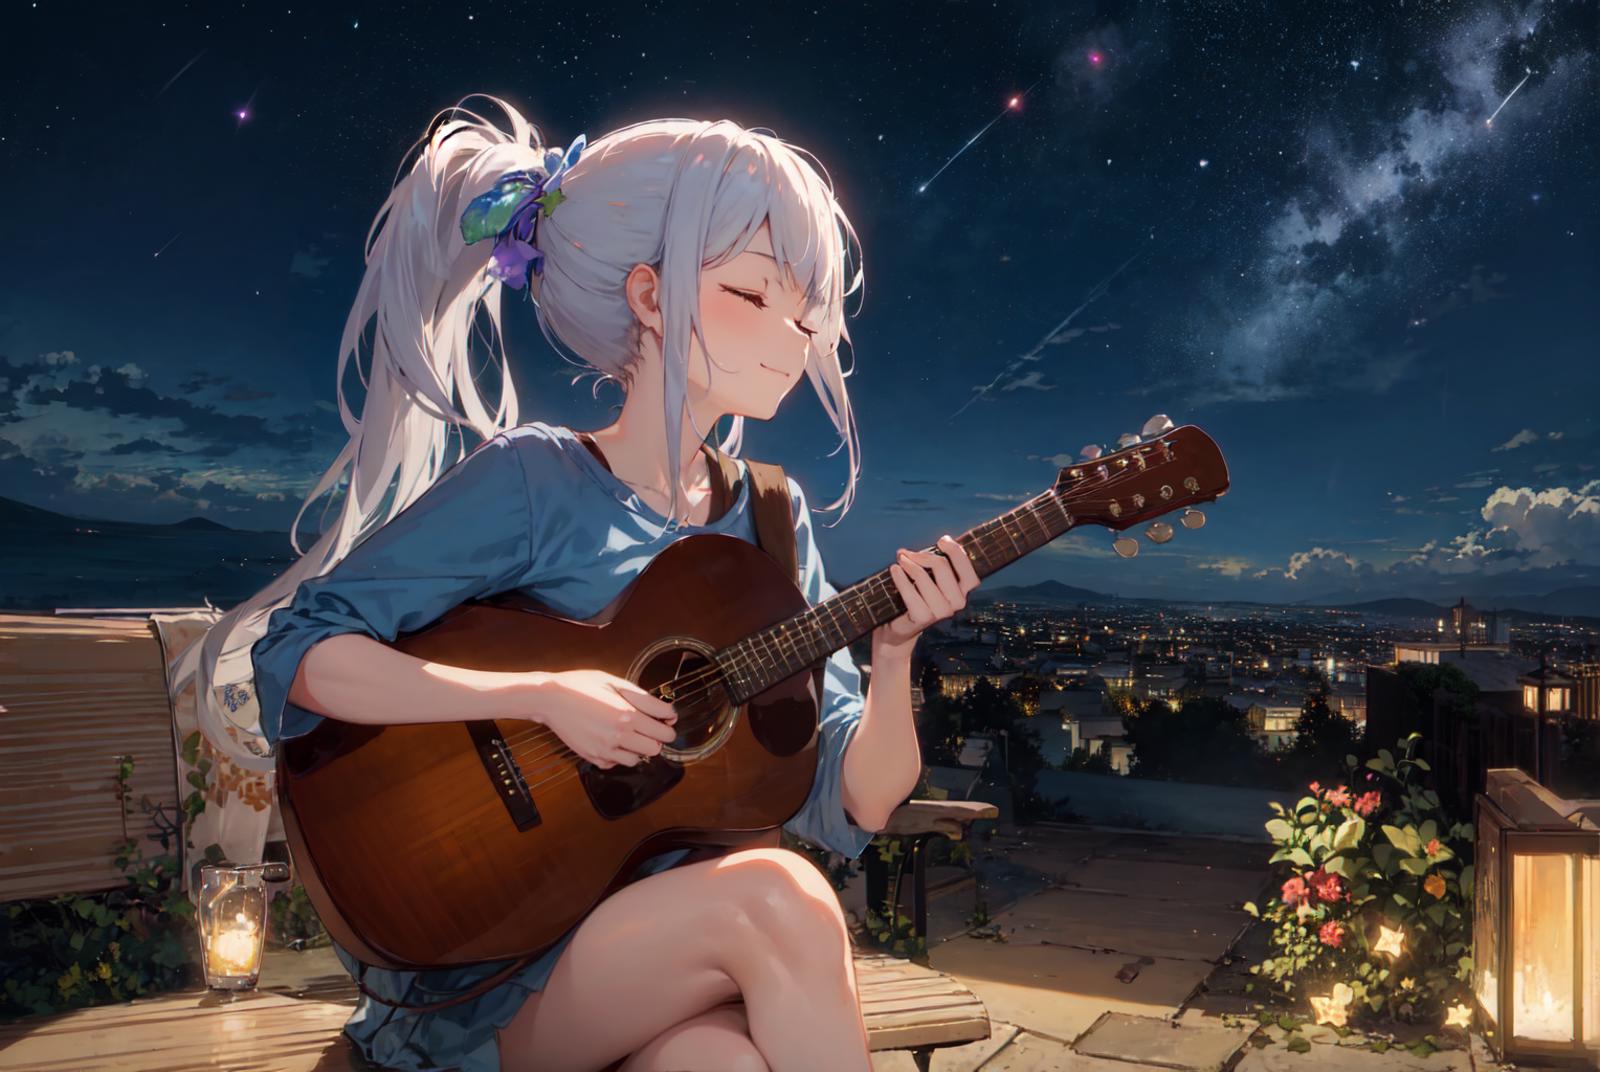 Anime Girl Playing Guitar at Night with City Lights in Background